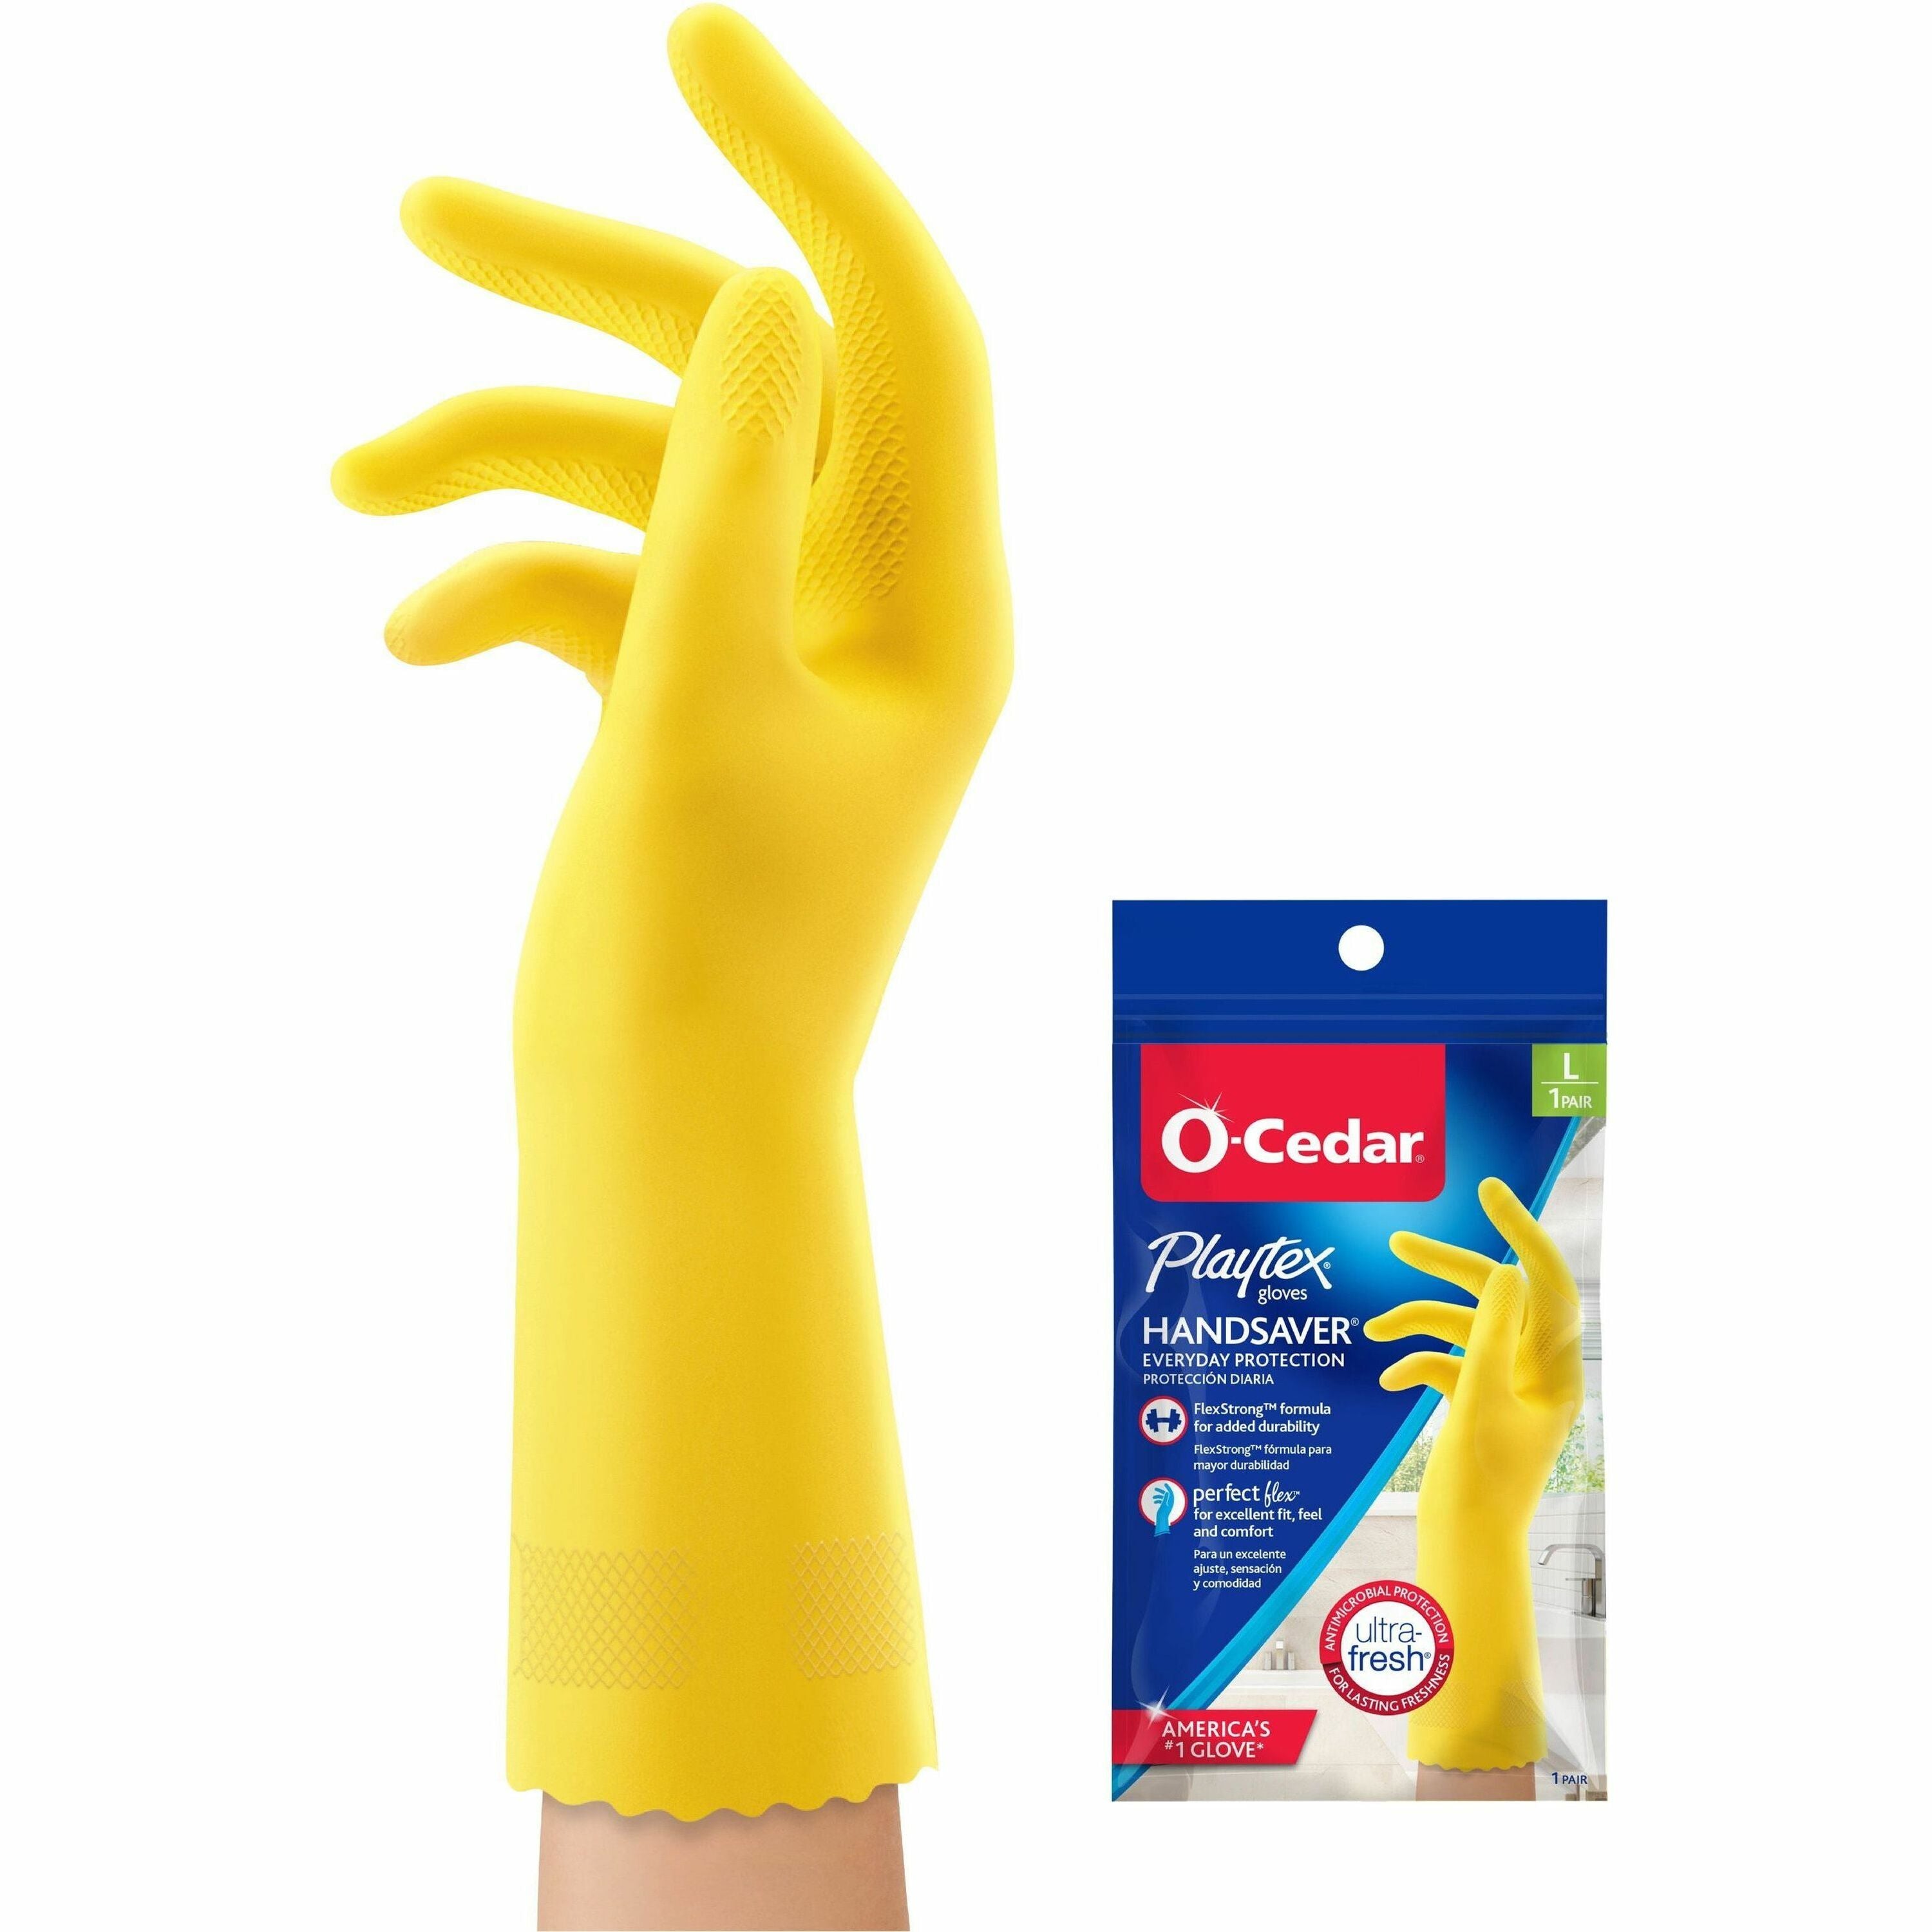 O-Cedar Playtex Handsaver Gloves - Hot Water, Chemical Protection - Large Size - Latex, Nitrile, Neoprene - Yellow - Long Lasting, Durable, Anti-microbial, Odor Resistant, Comfortable, Textured Fingertip, Textured Palm, Reusable - For Household, Clea